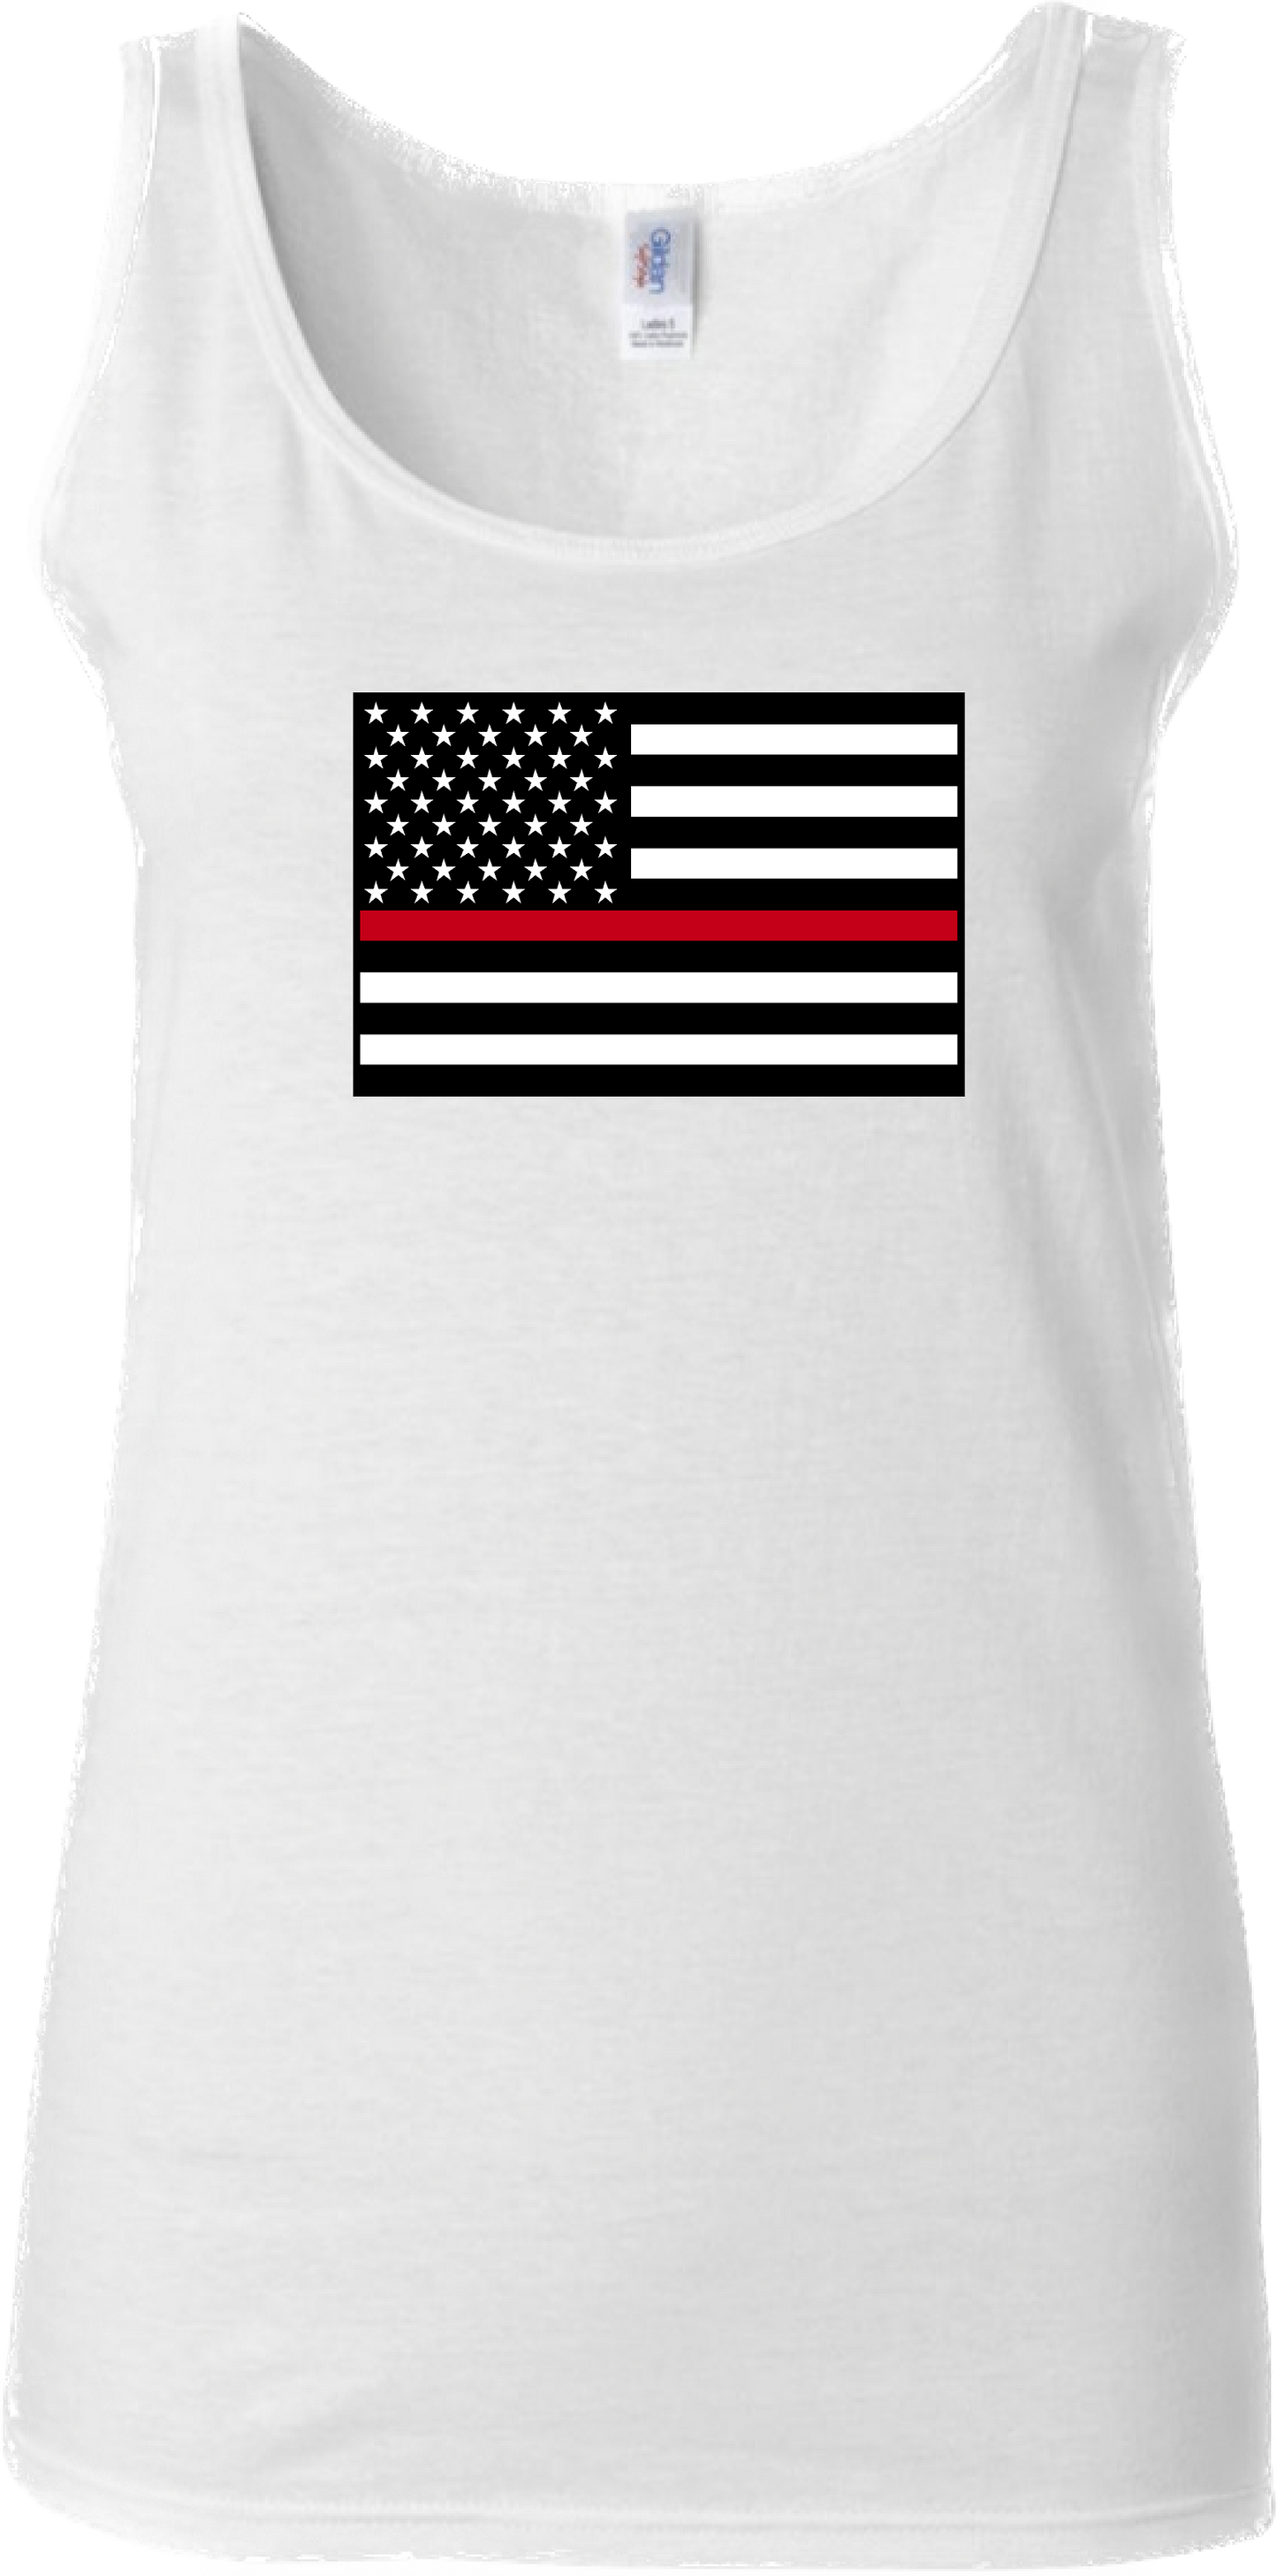 Women’s Thin Red Line United States Flag Tank Top